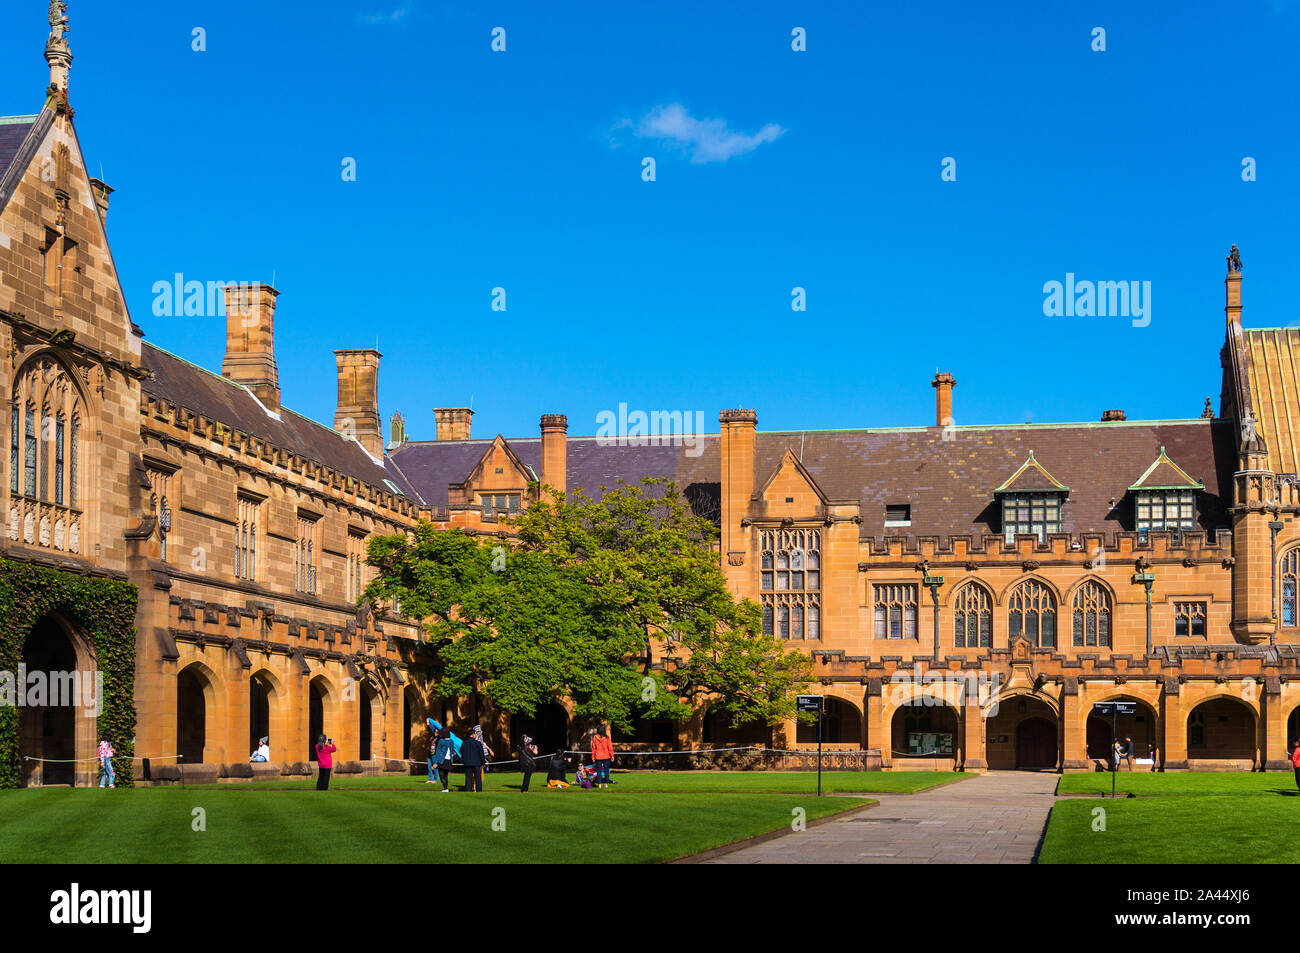 Sydney Uni inner yard with students in the distance enjoying break. University of Sydney courtyard against deep blue sky with white clouds, daytime ph Stock Photo